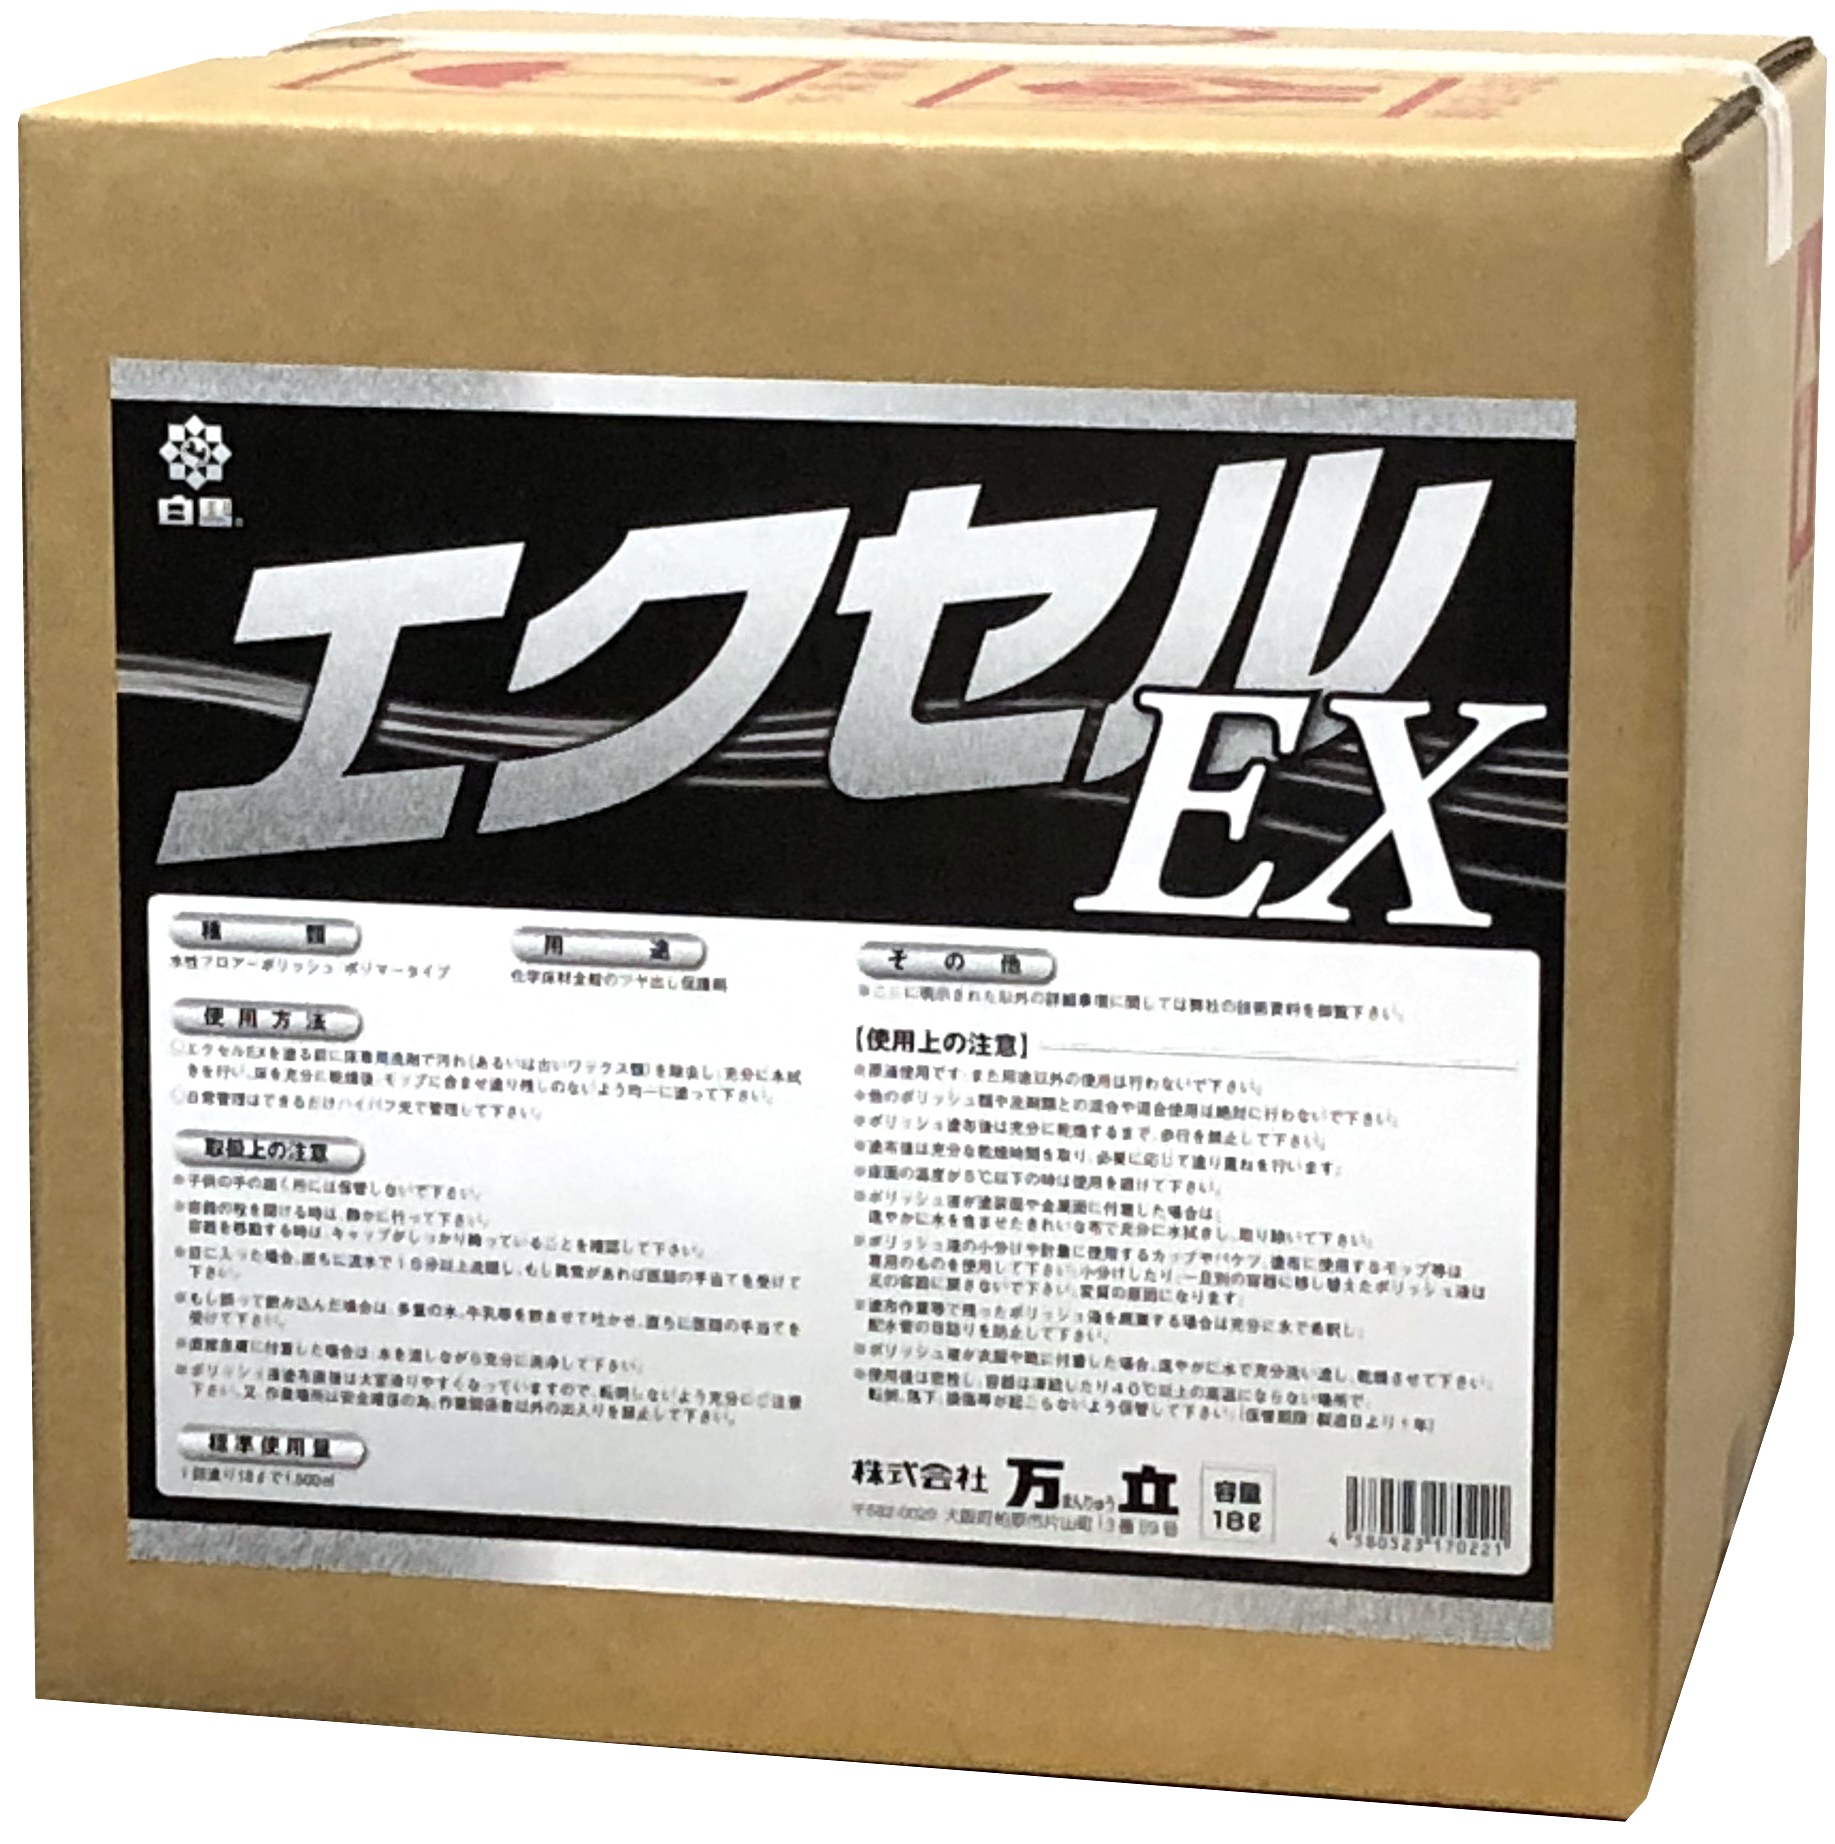 Hakuba EXCEL EX 18L  Resin wax Highly concentrated resin wax